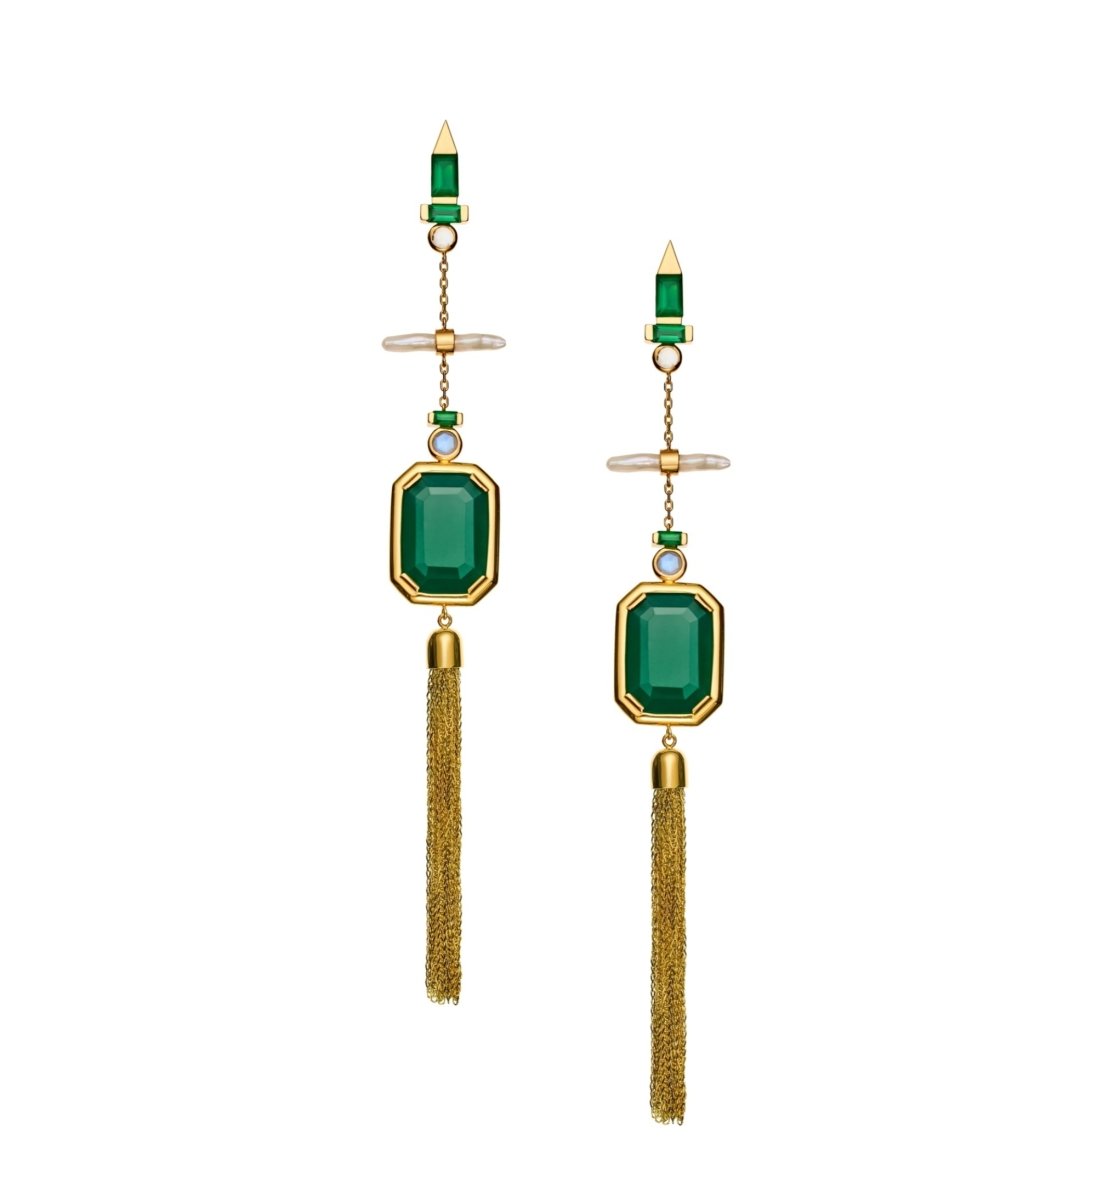 Ltio Pair of 18kt Gold Tassel Earrings with Green Agate, Moonstones and Pearls - Homebody Denver